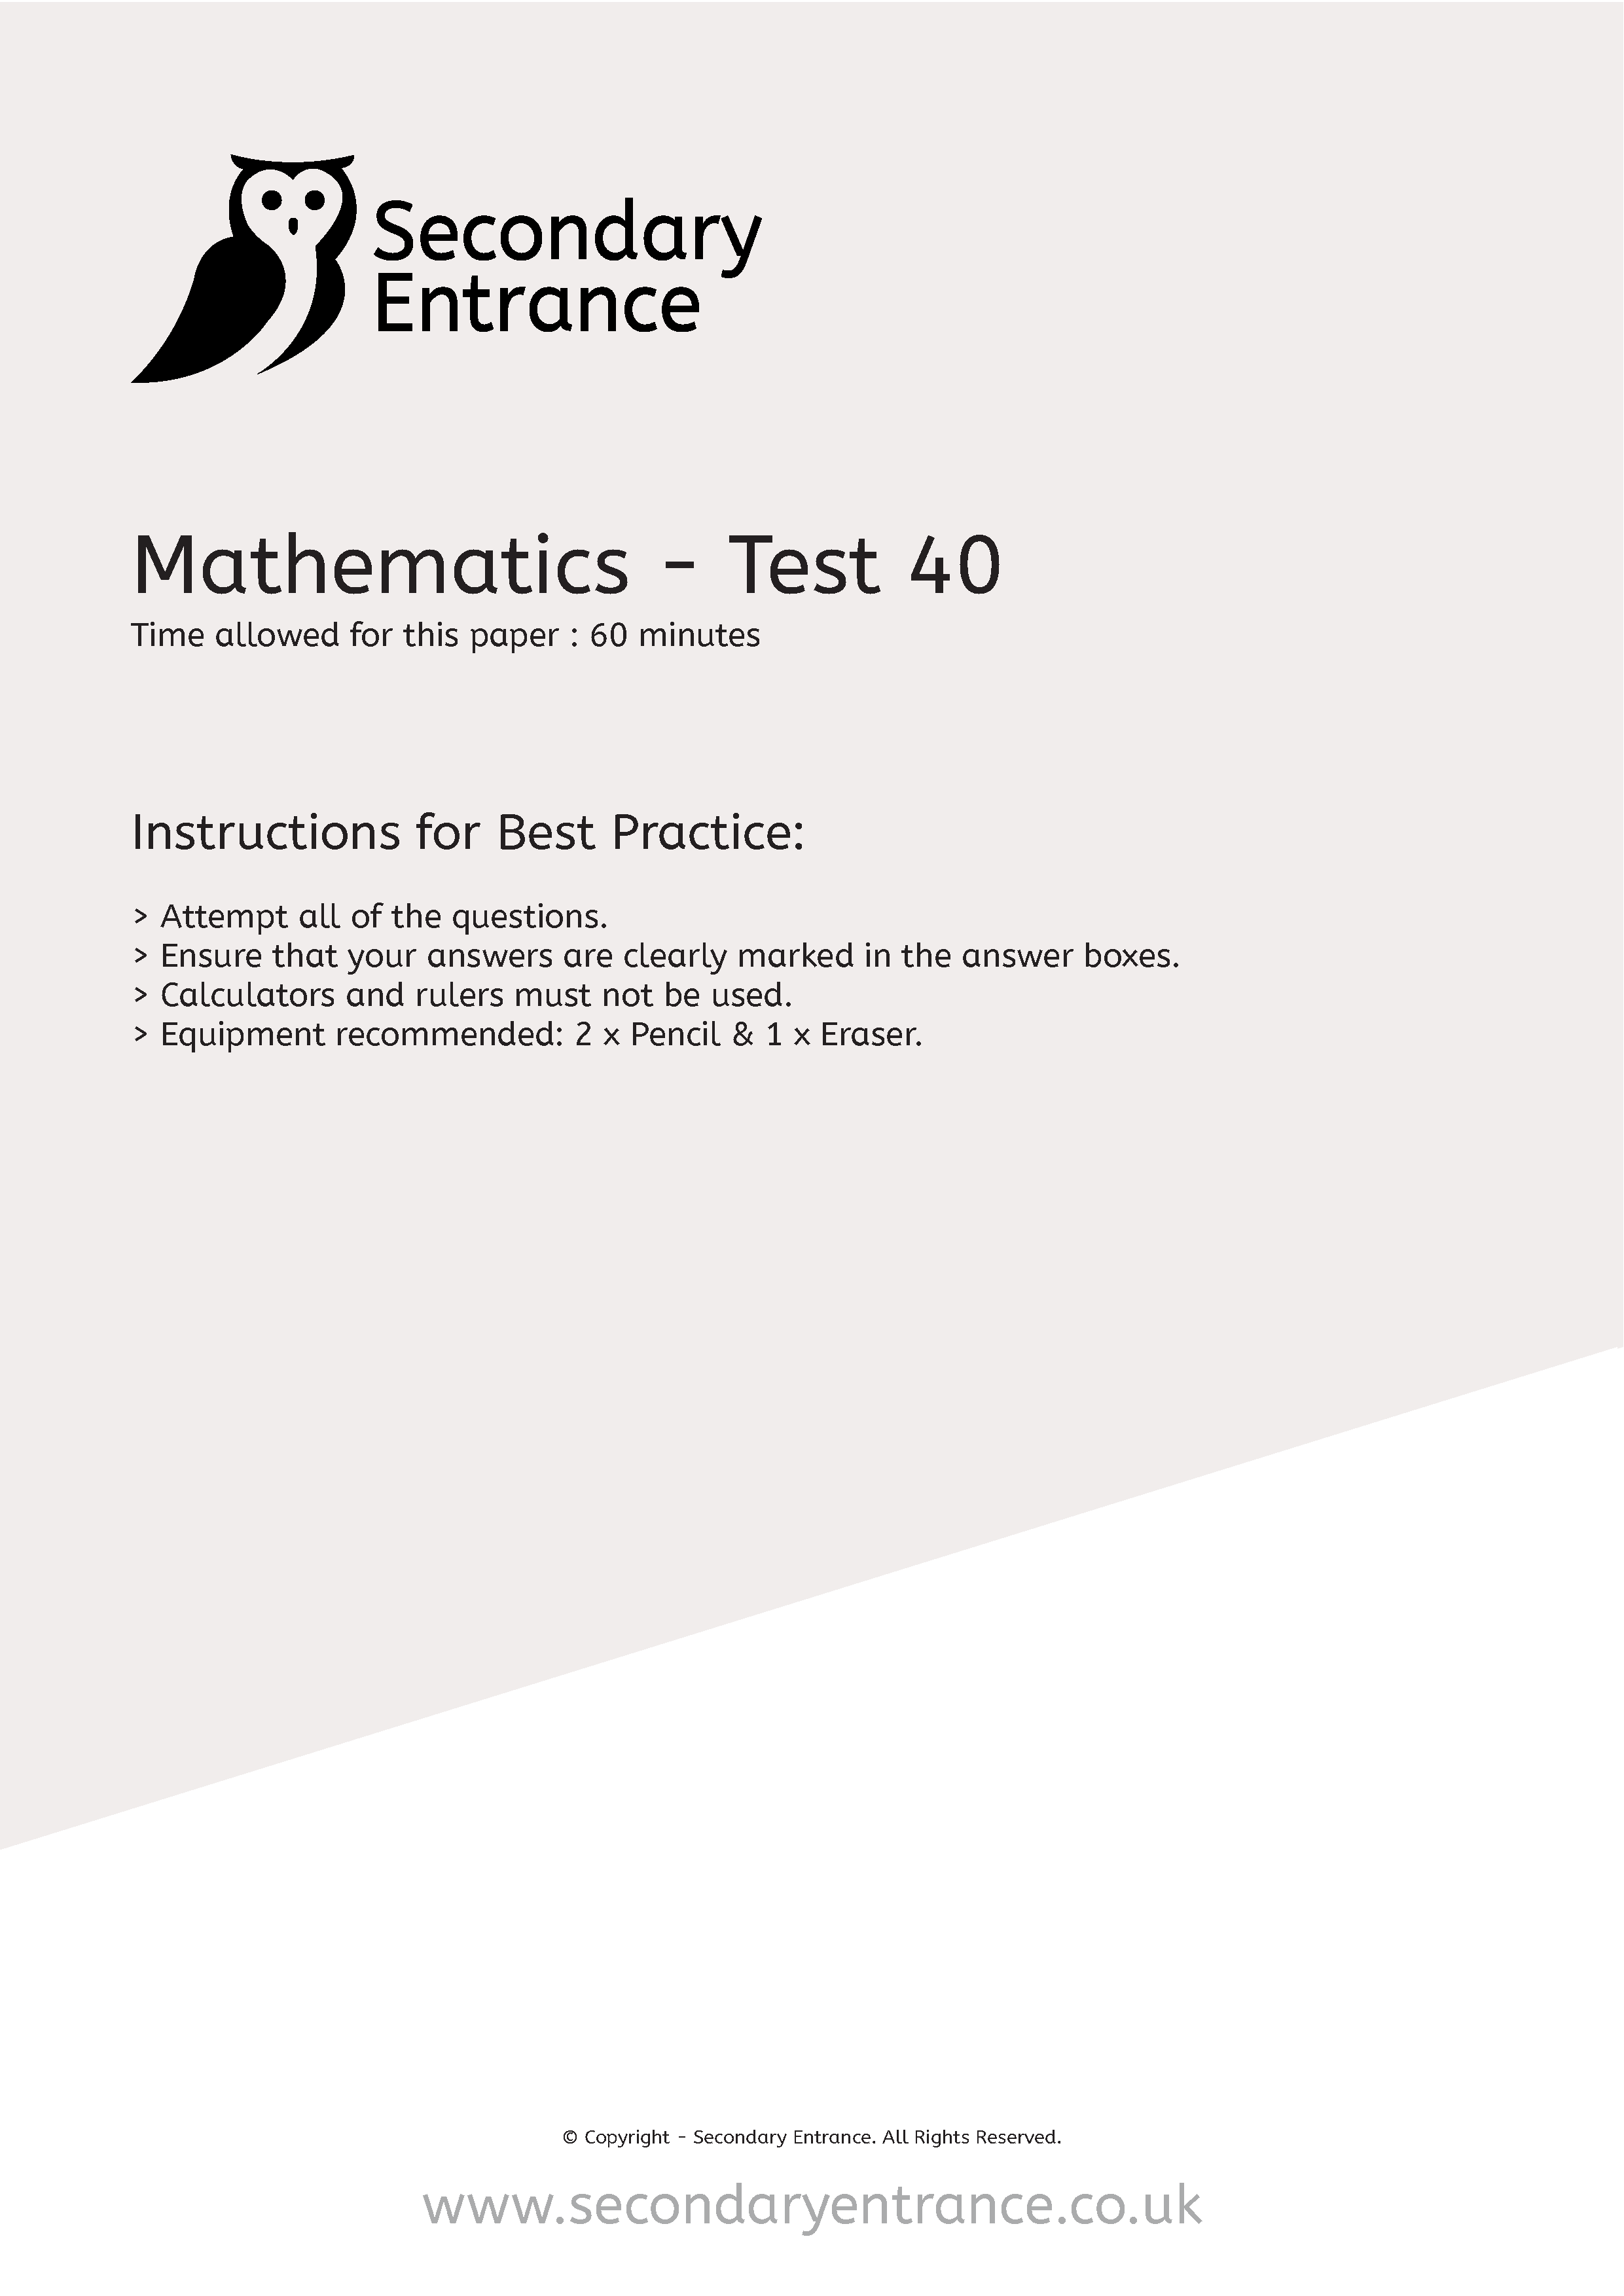 Maths sample paper for 11+ exams